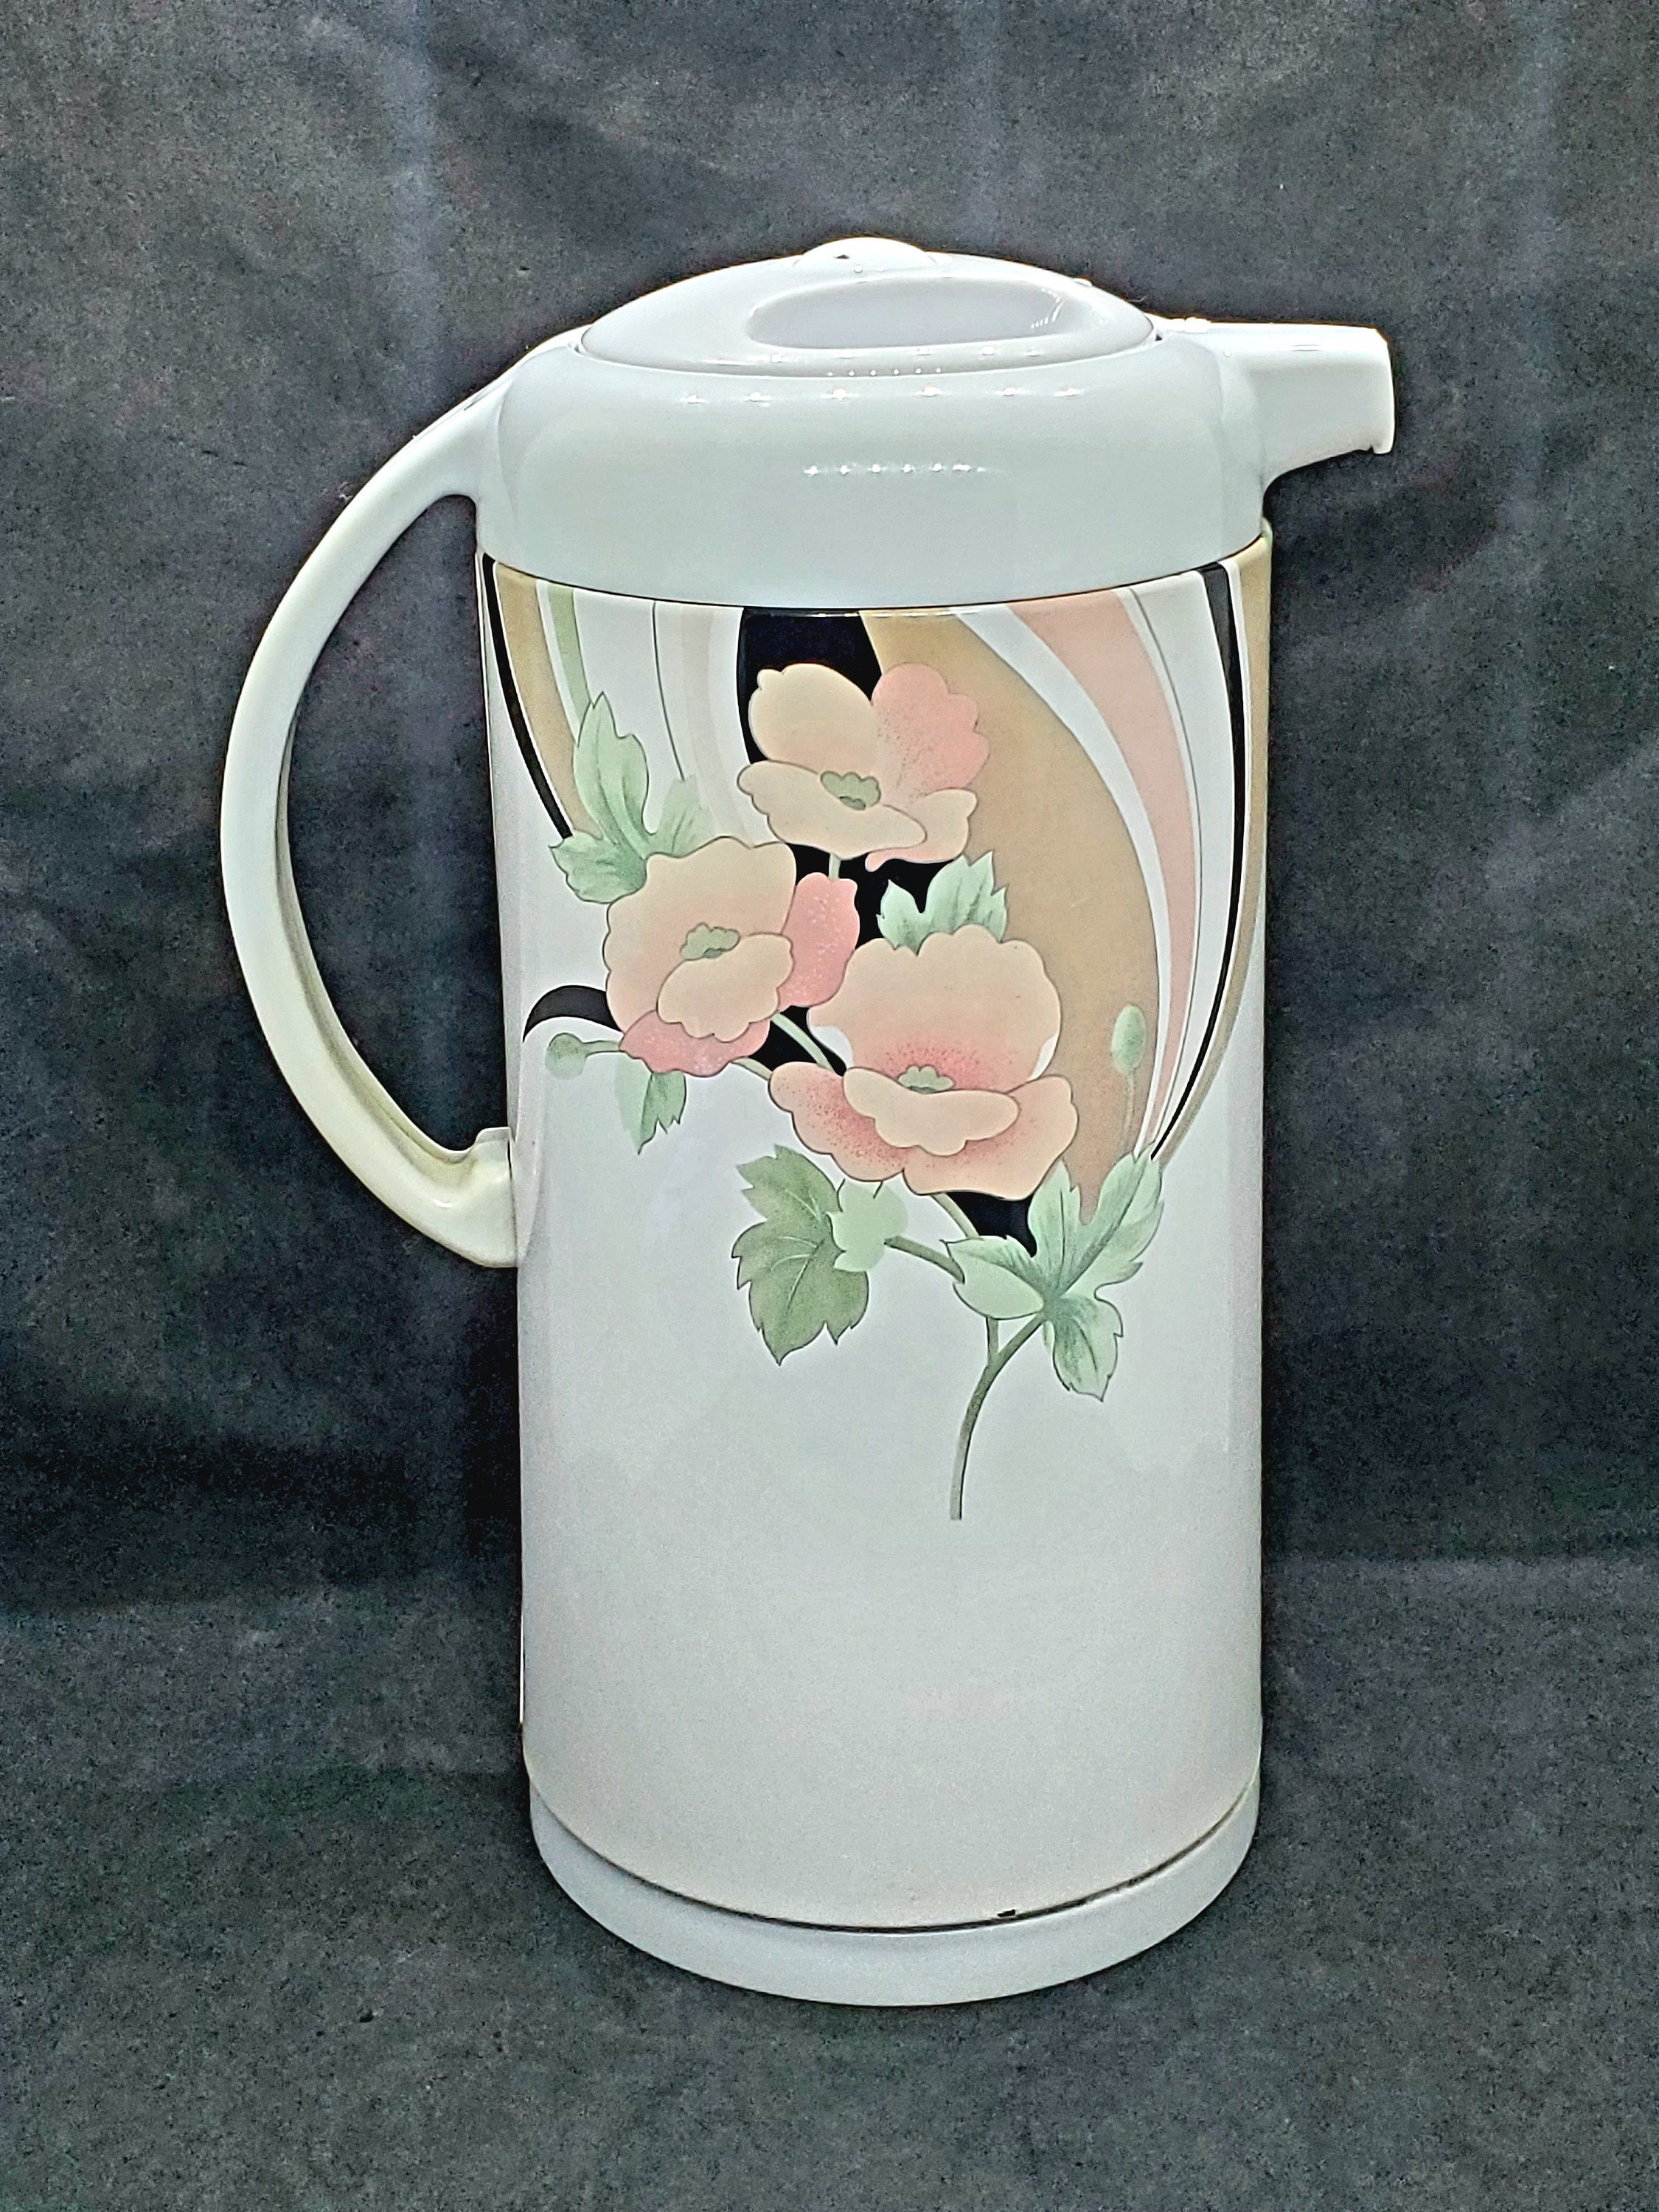 Thermos Ware Coffee Butler 32 oz Model 450 Beige Vintage New In Box